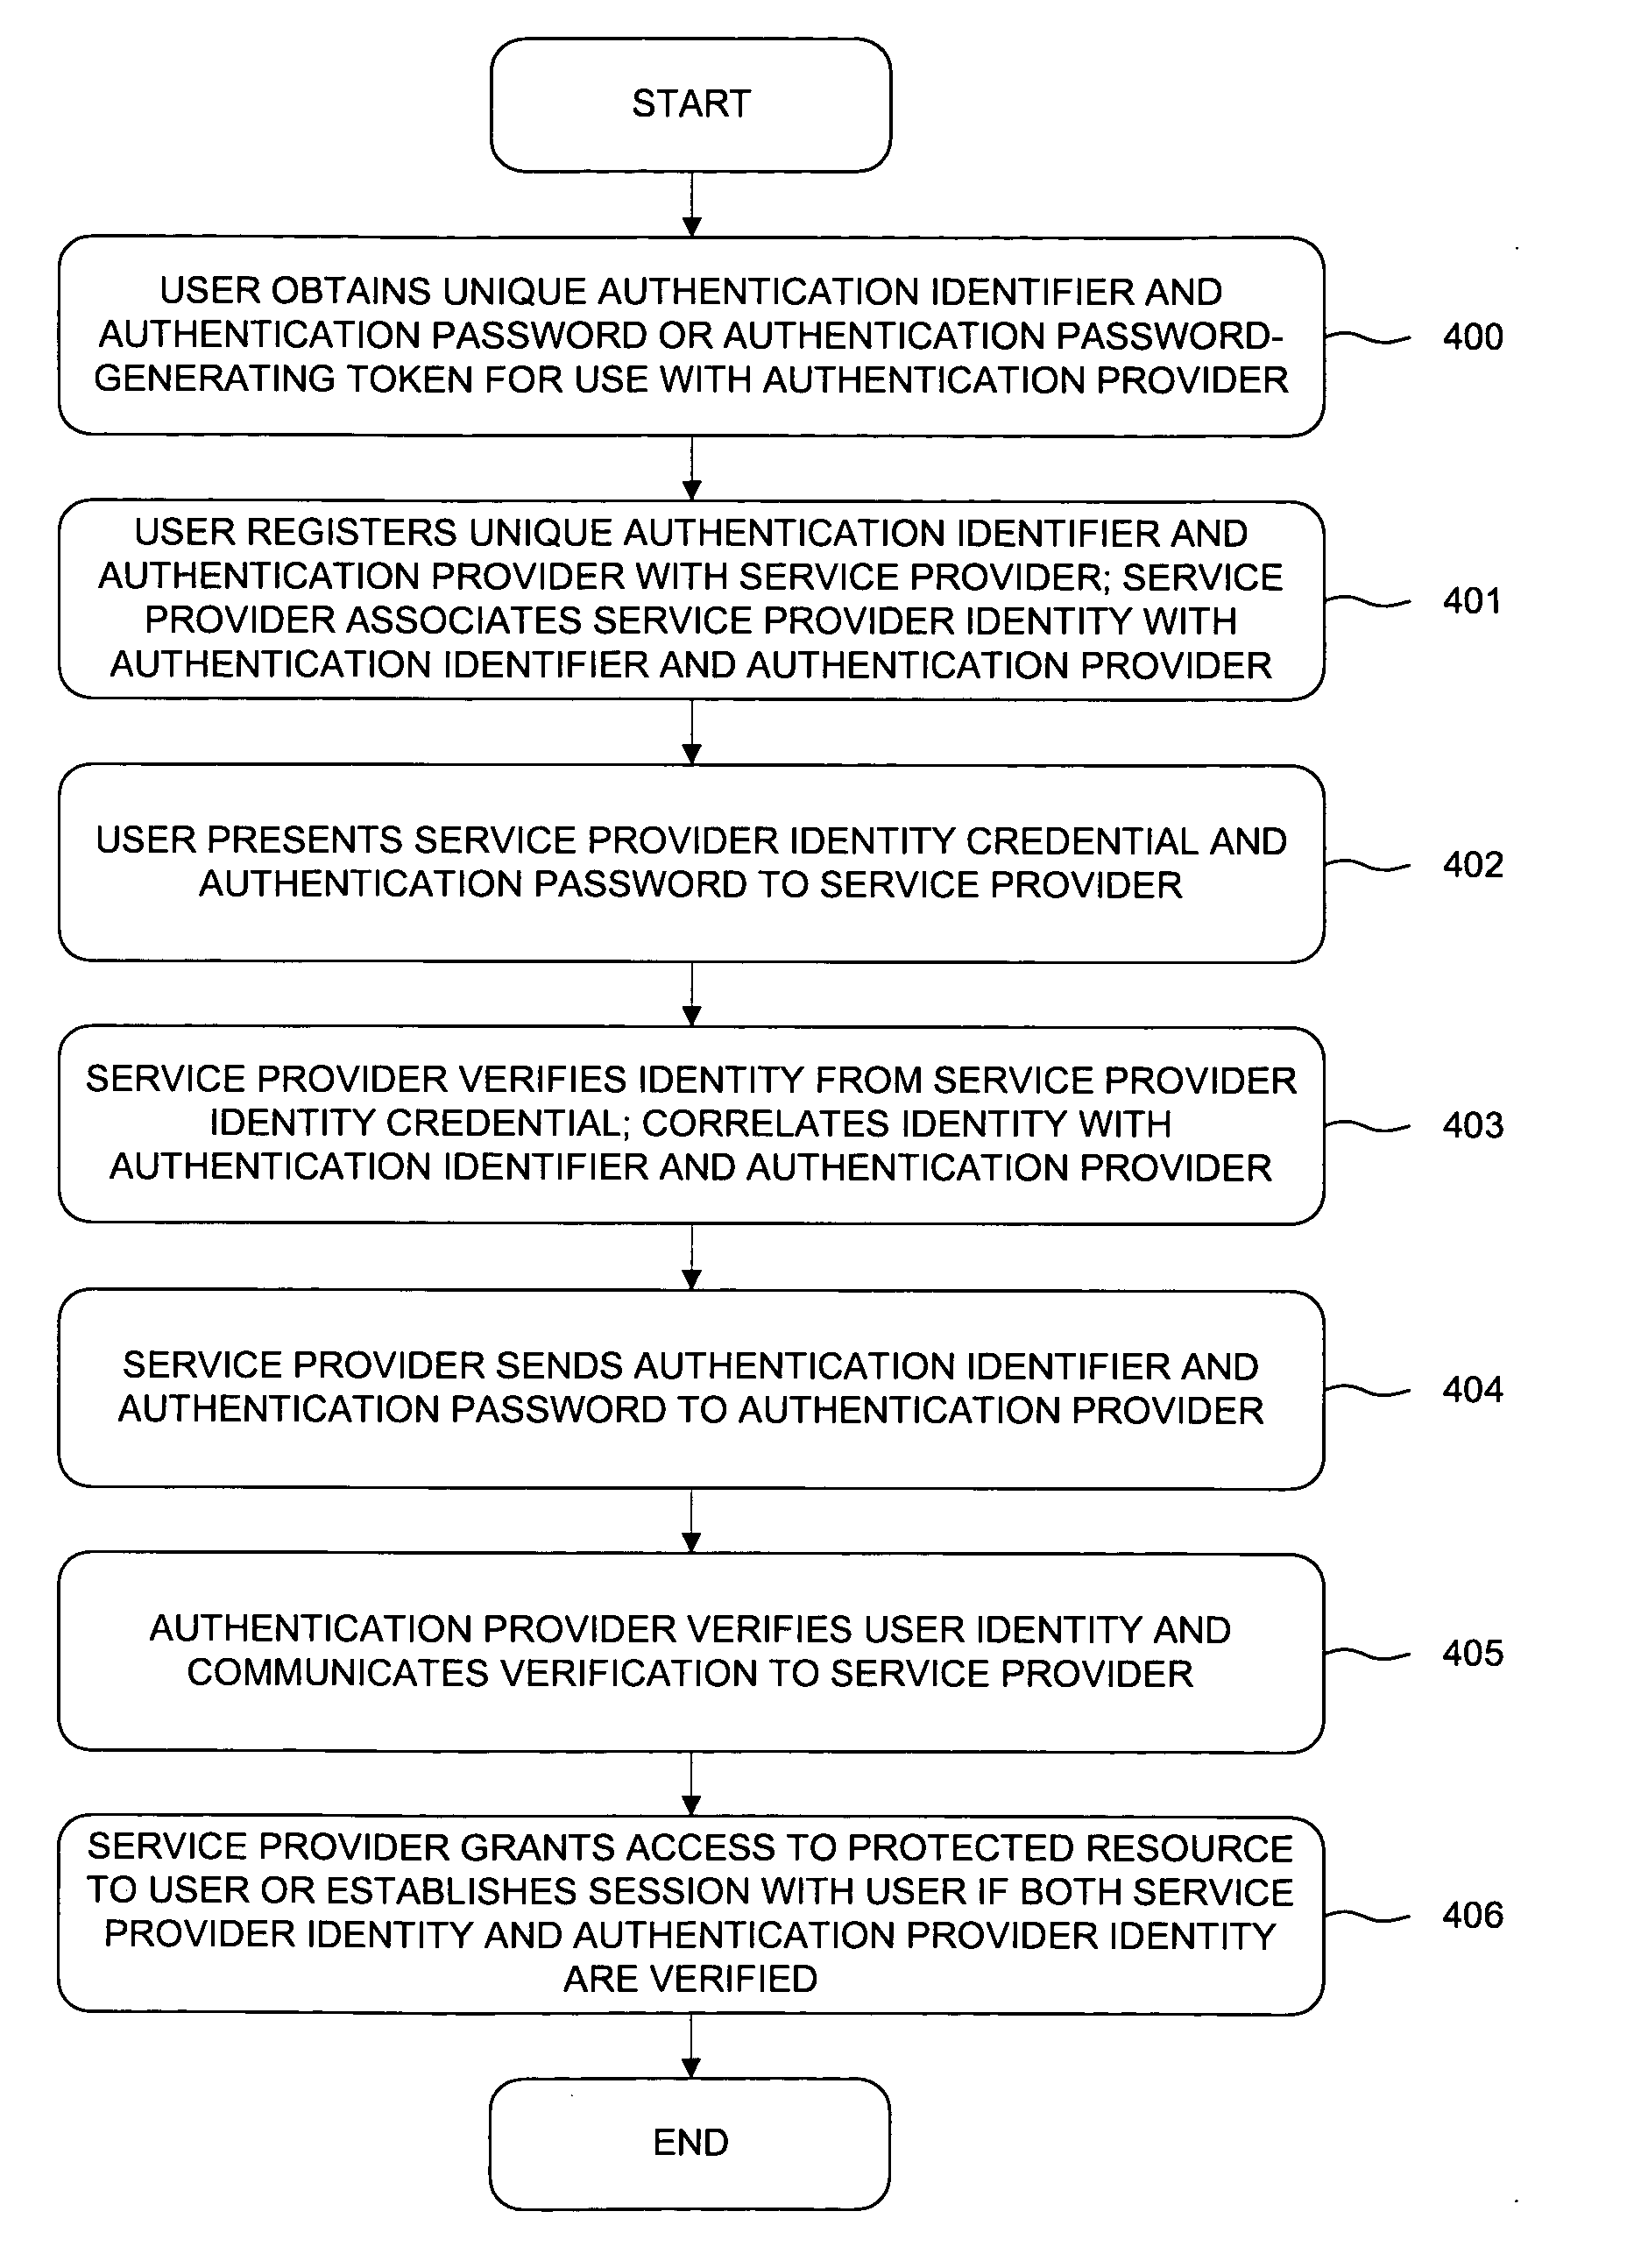 Third party authentication of an electronic transaction